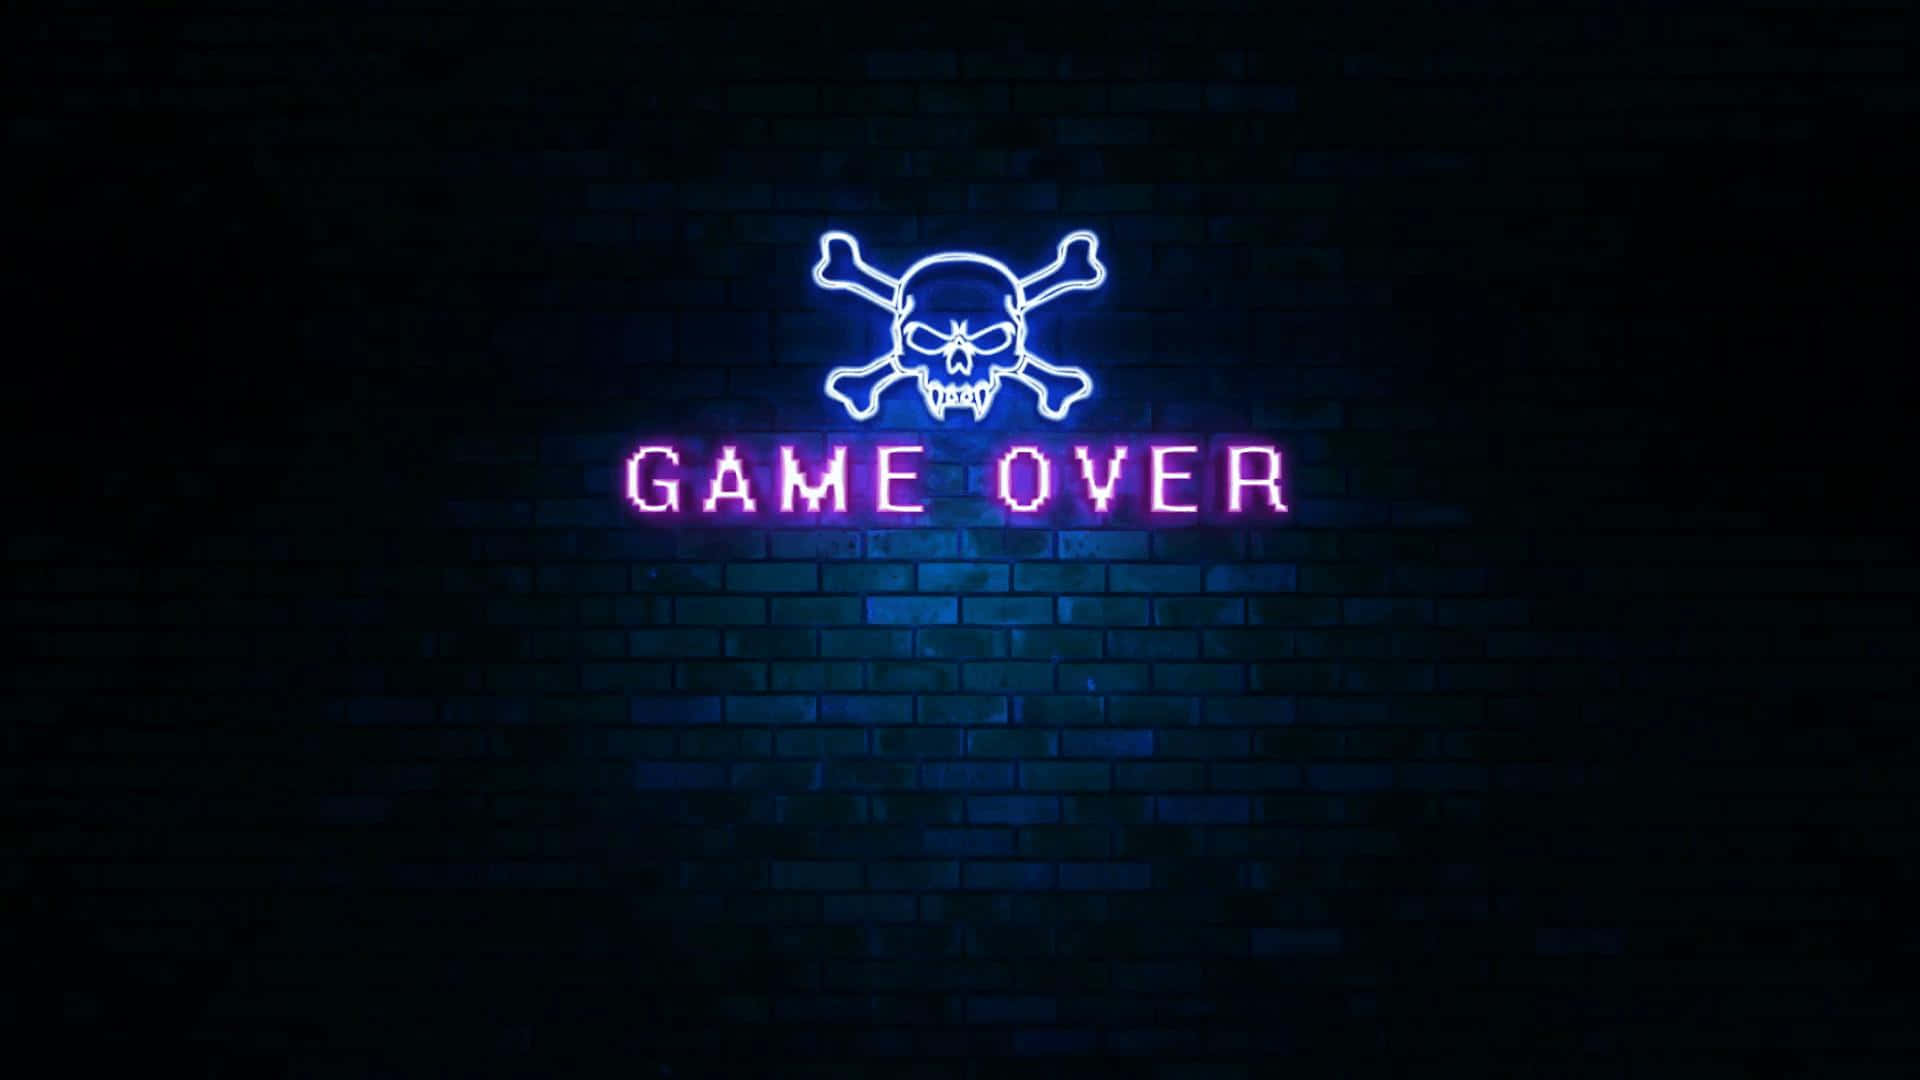 Game Over Neon Sign On Brick Wall Wallpaper